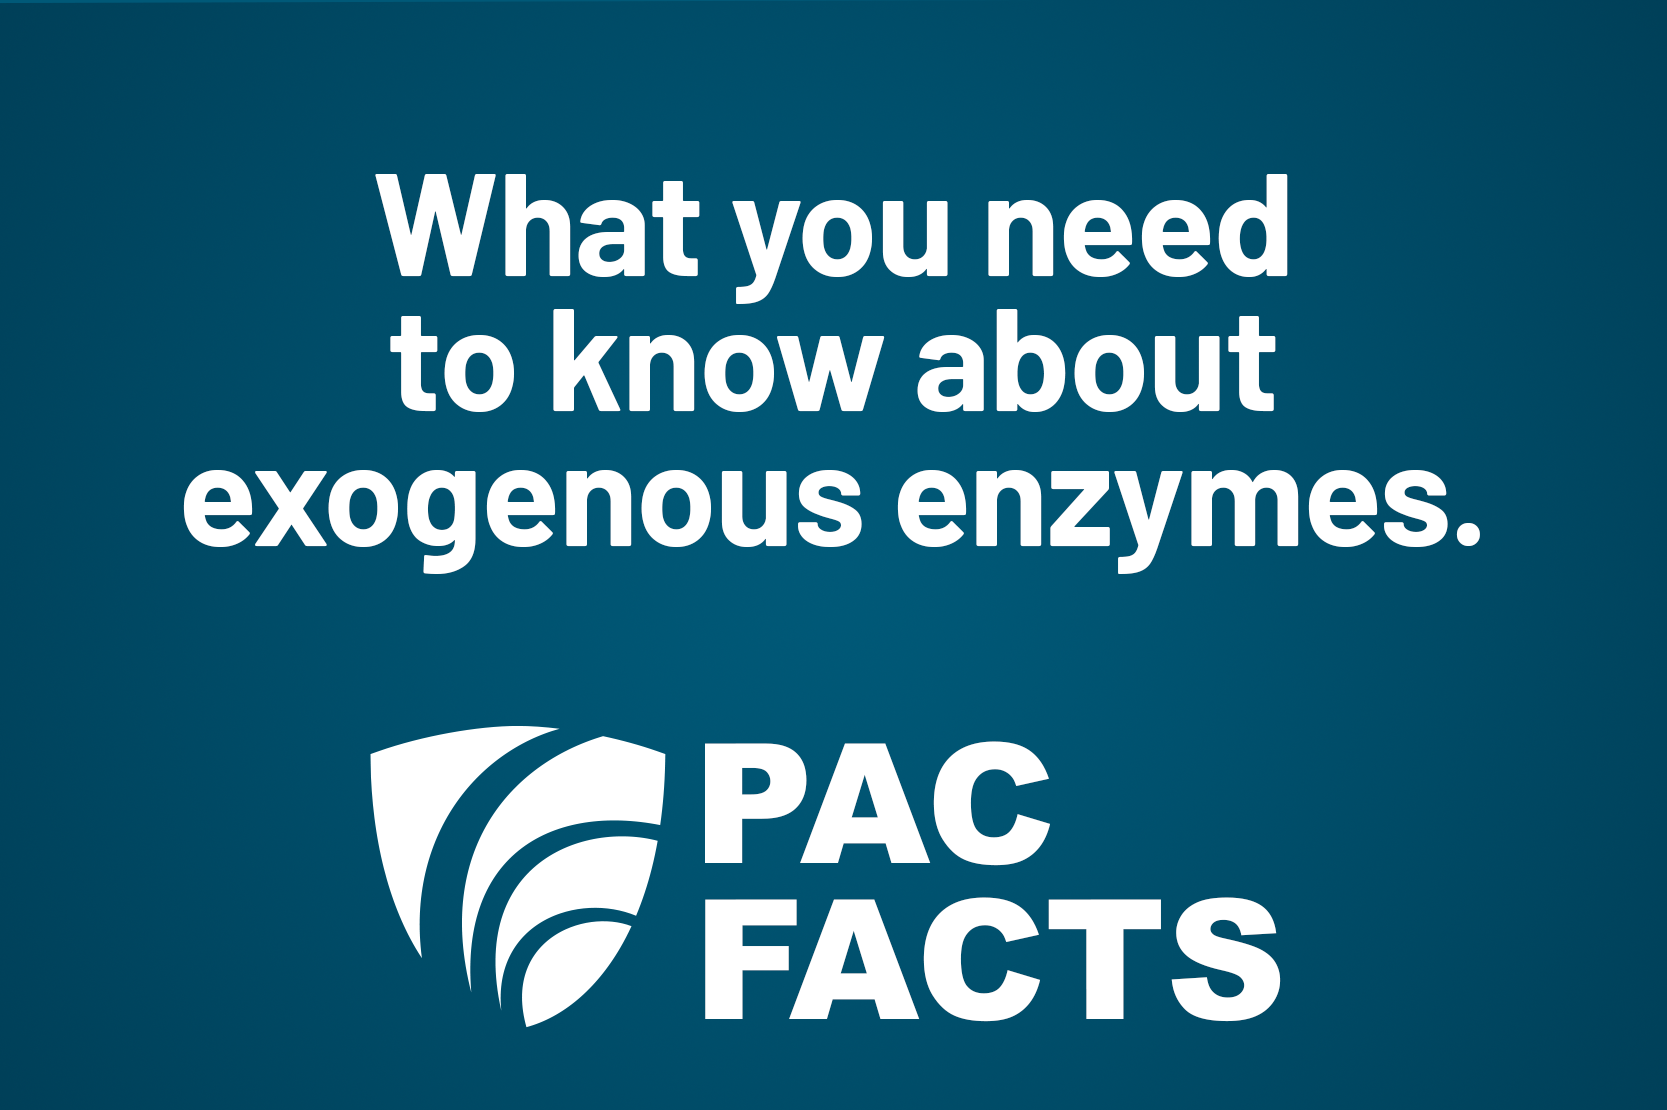 PAC FACTS - What you need to know about exogenous enzymes.